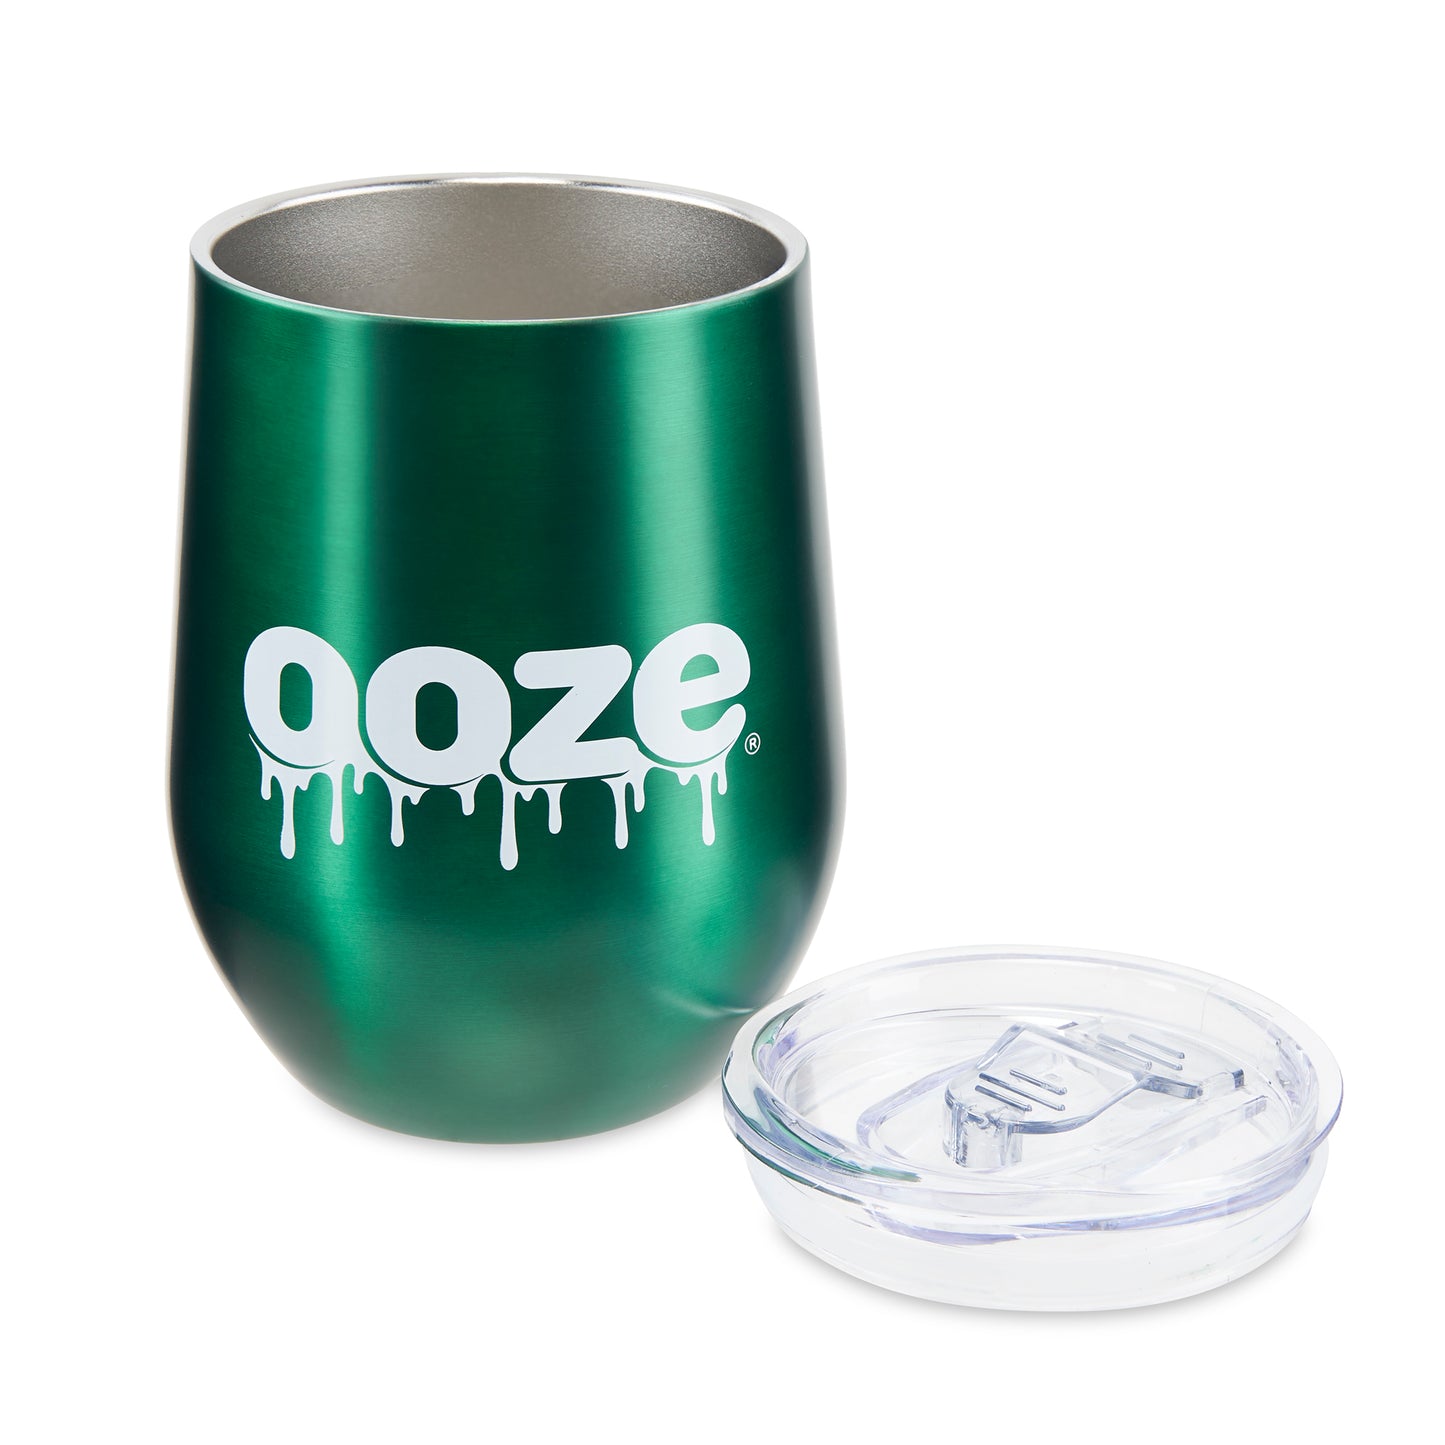 The green Ooze Tumbler is sitting upright with the plastic cap removed and sitting to the right of the cup.